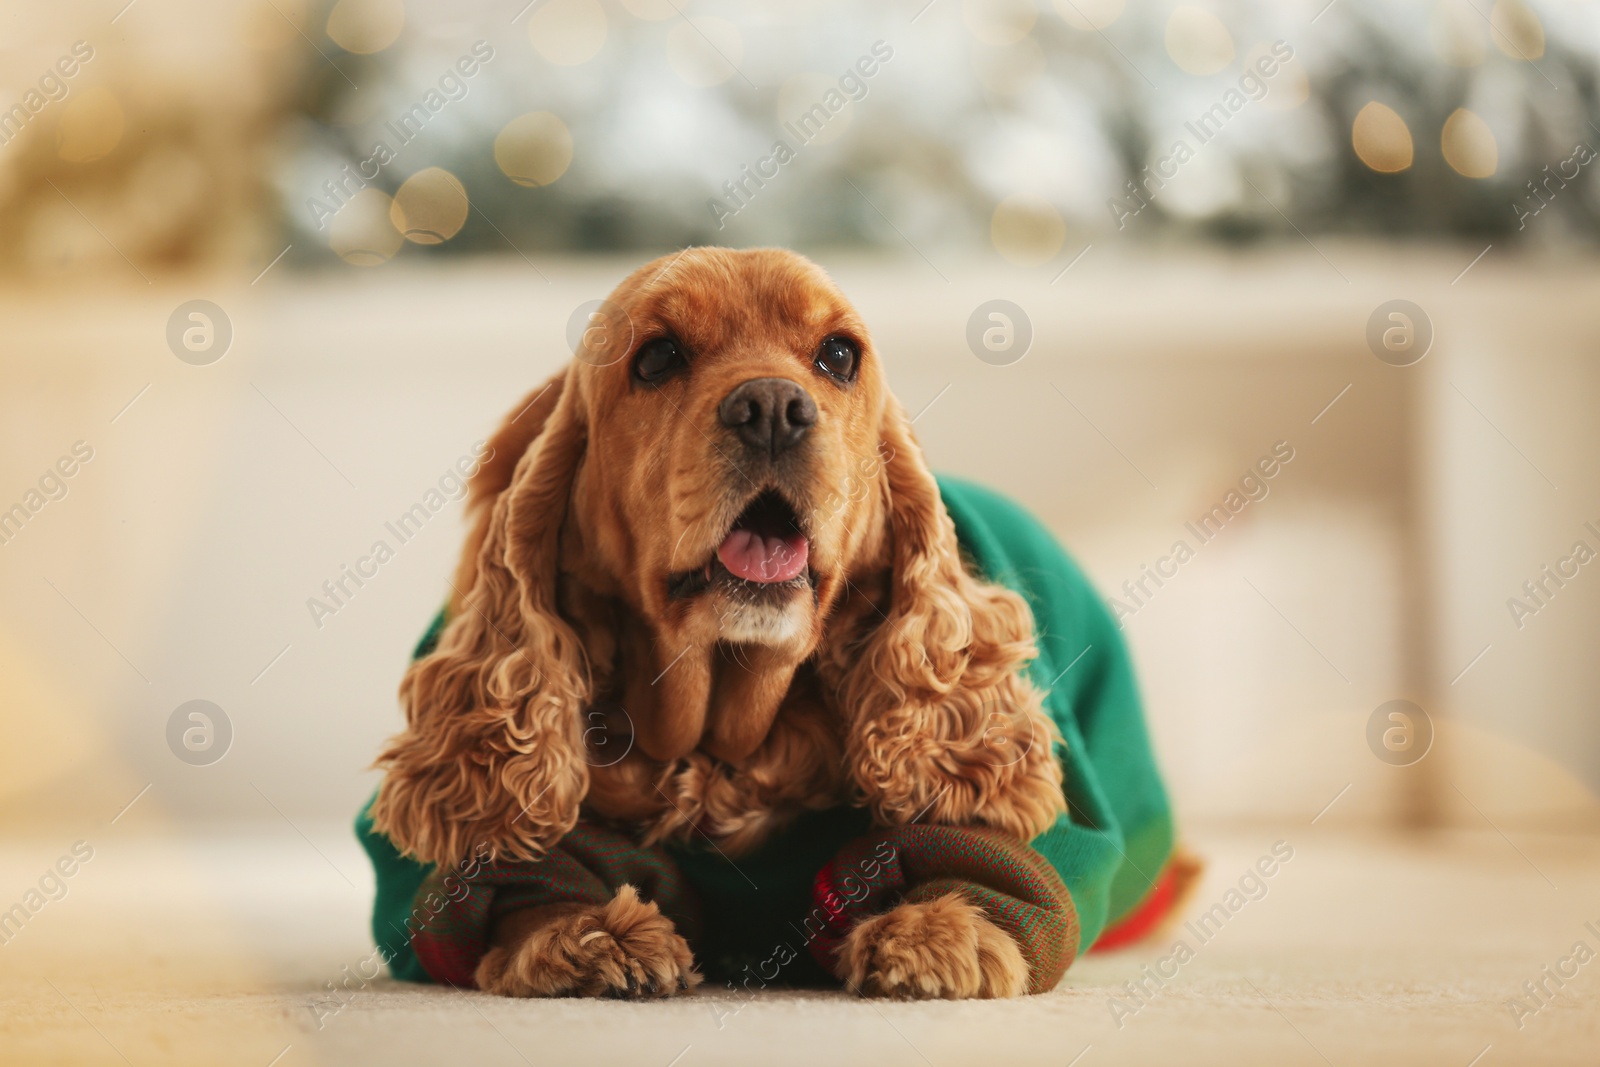 Photo of Adorable Cocker Spaniel in Christmas sweater on blurred background